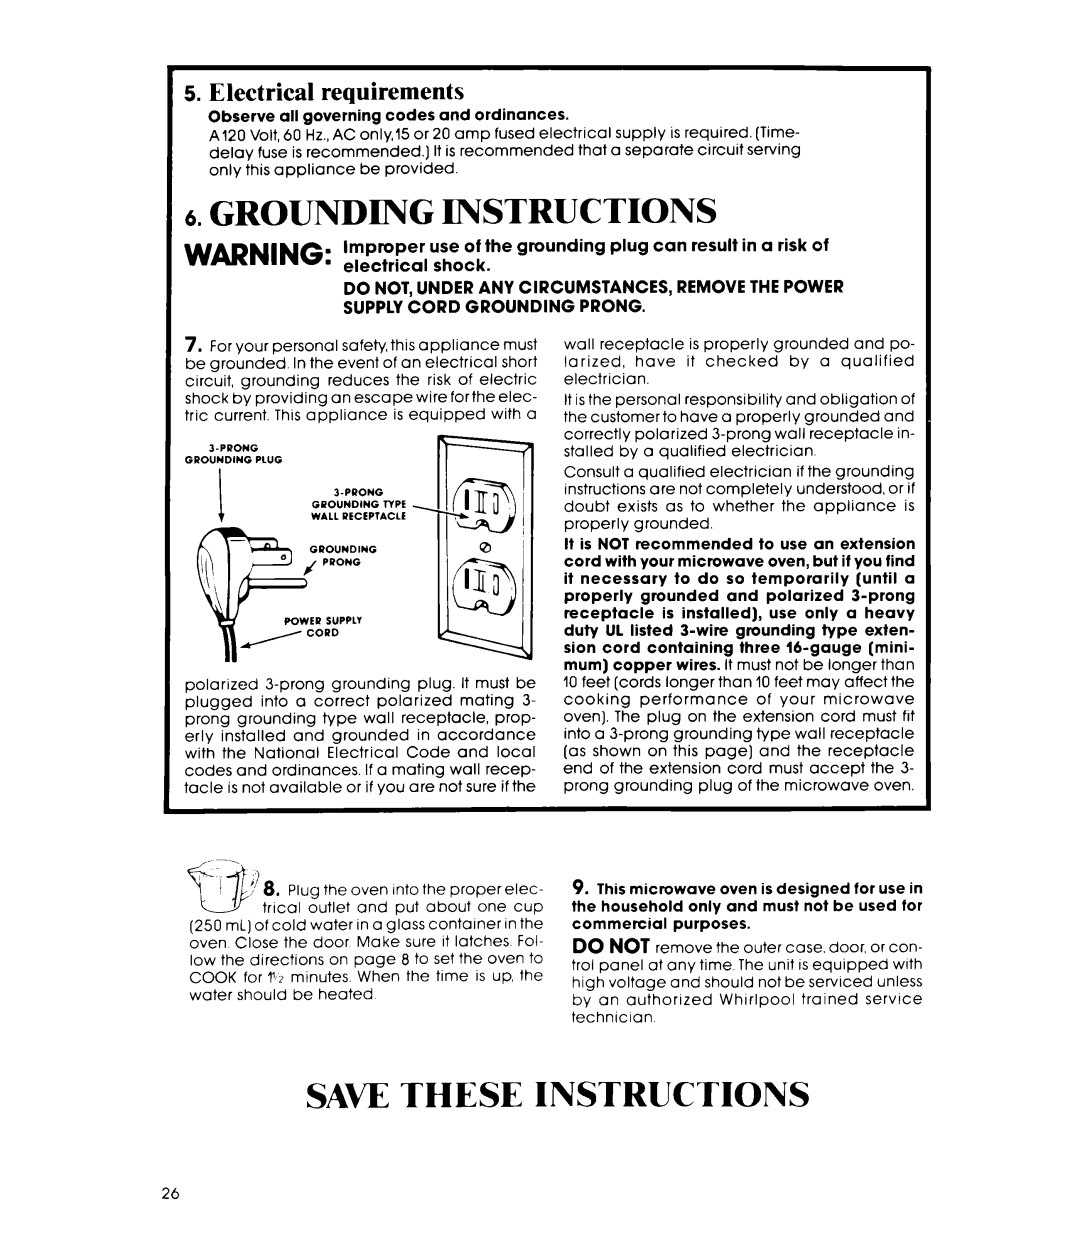 Whirlpool MW8700XR manual Grounding Instructions, Electrical requirements, Saw These Instructions 